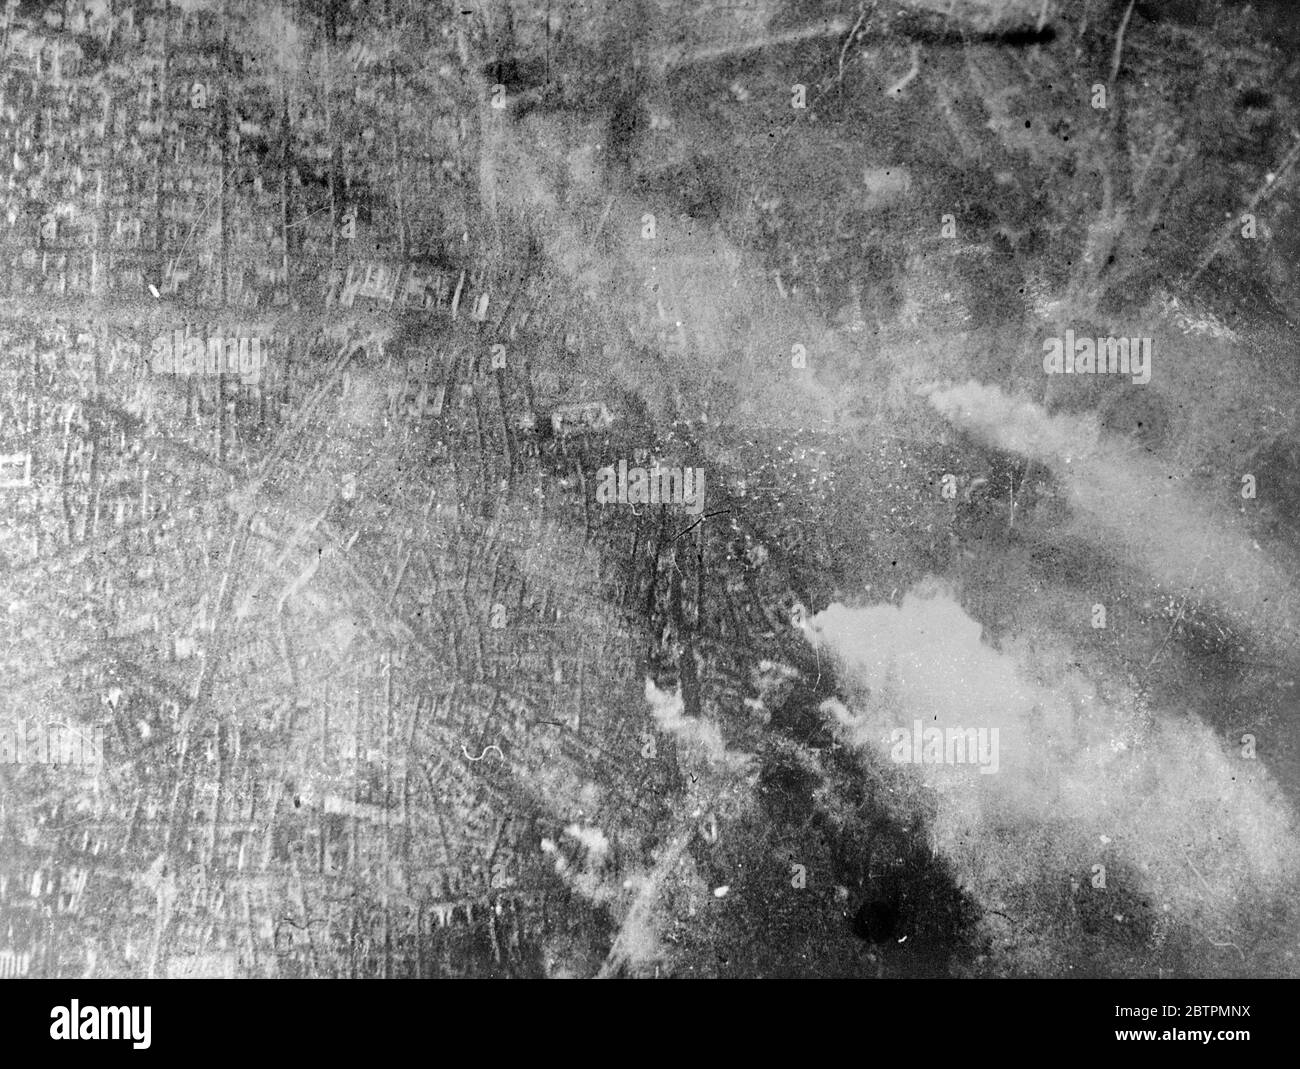 Madrid under fire . Picture from the air . An aerial view of Madrid as the capital was subjected to an intense bombardment by the besieging forces of General Franco . Clouds of smoke are seen rising from numerous fire started by the bombardment . 30 March 1937 Stock Photo